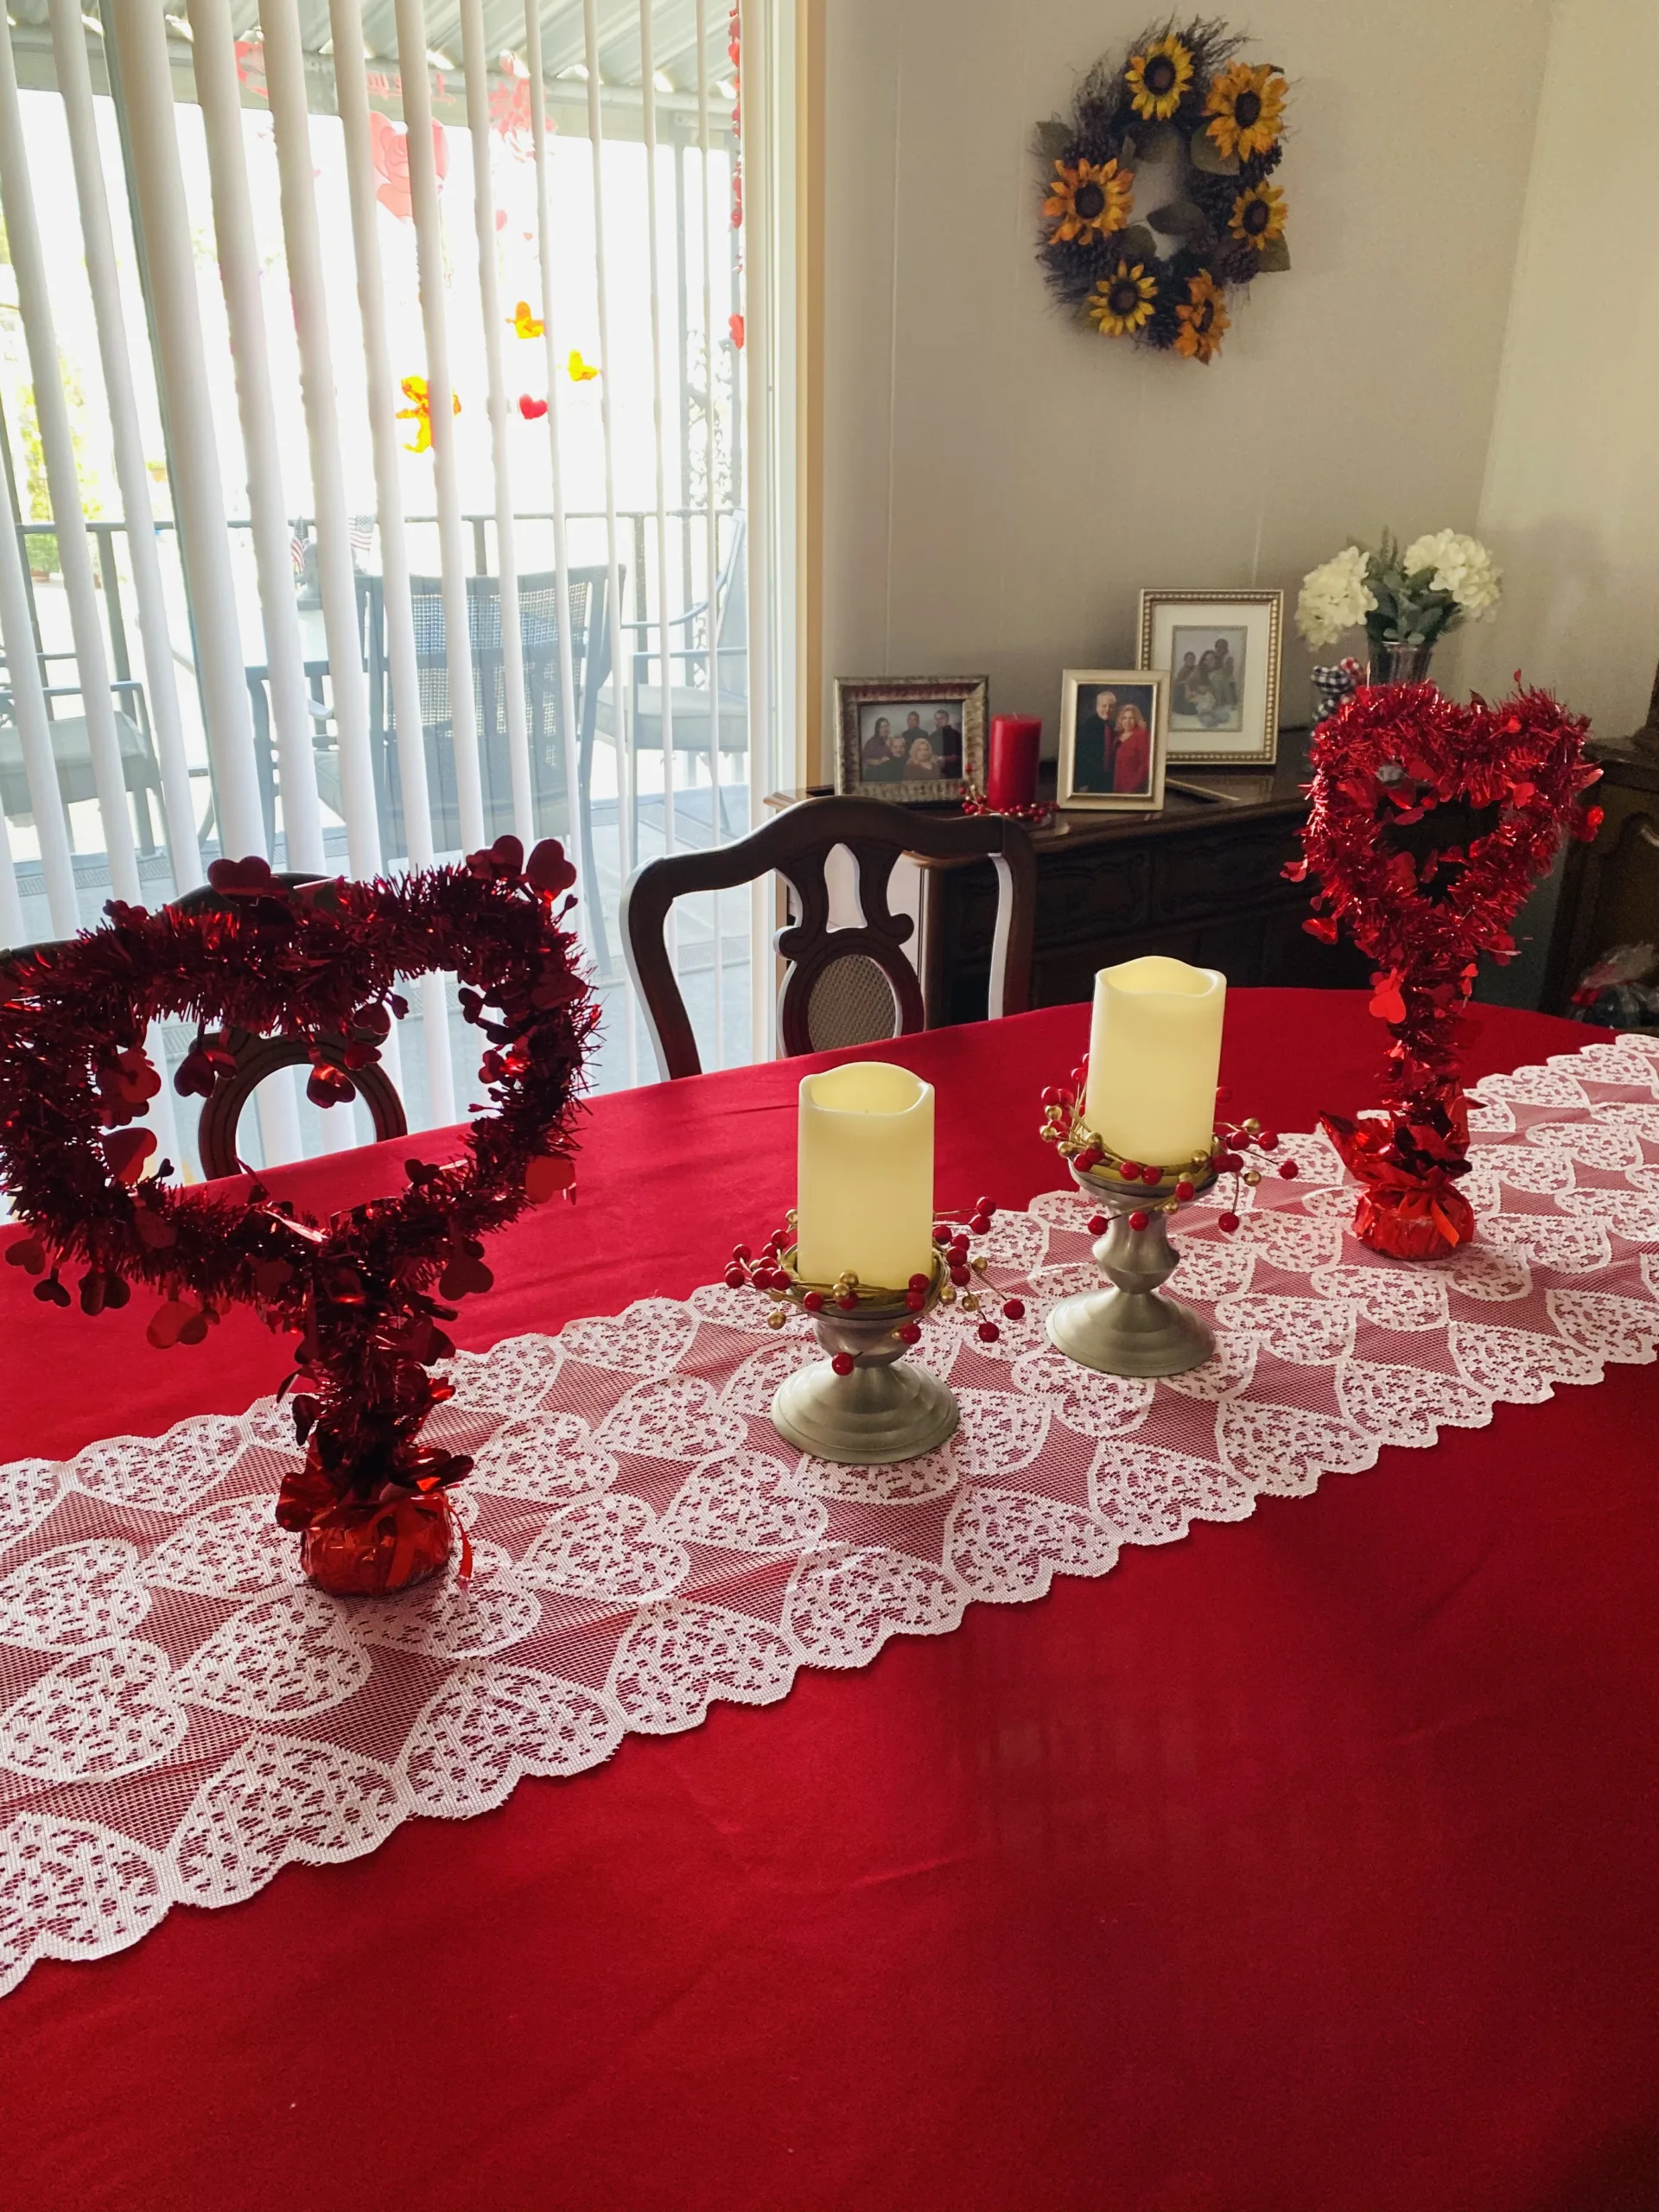 Valentine S Day Tablescapes Red Tablecloth Rectangle With Lace Table Runner